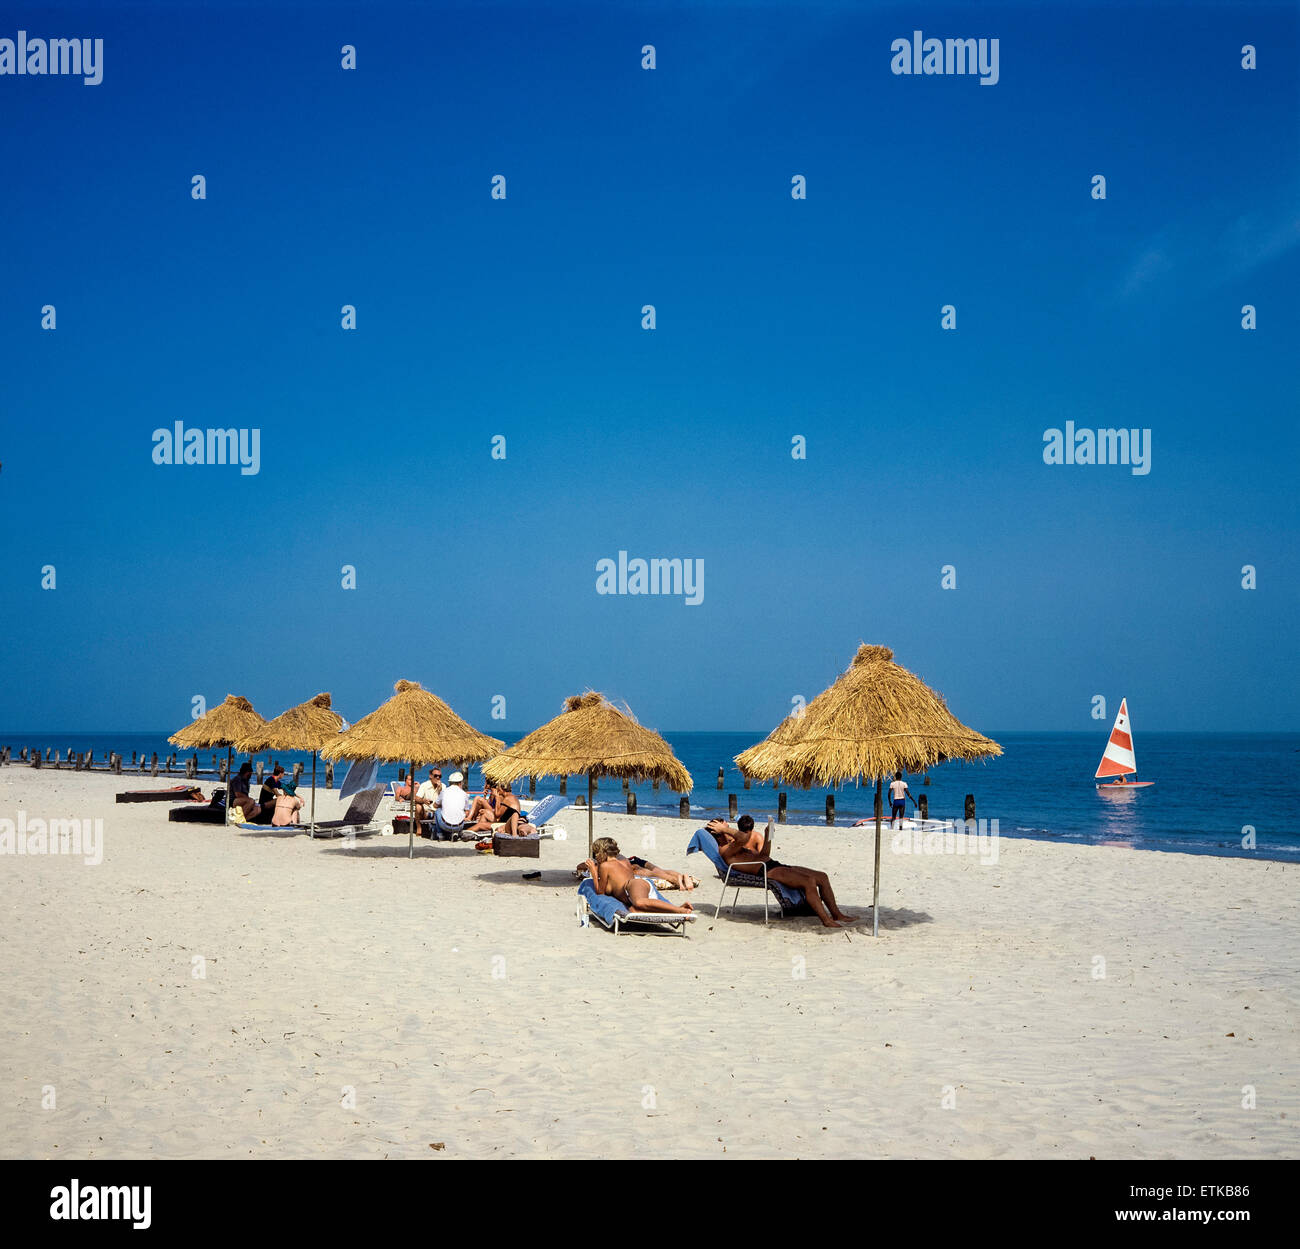 Holidaymakers sunbathing on beach, Gambia, West Africa Stock Photo